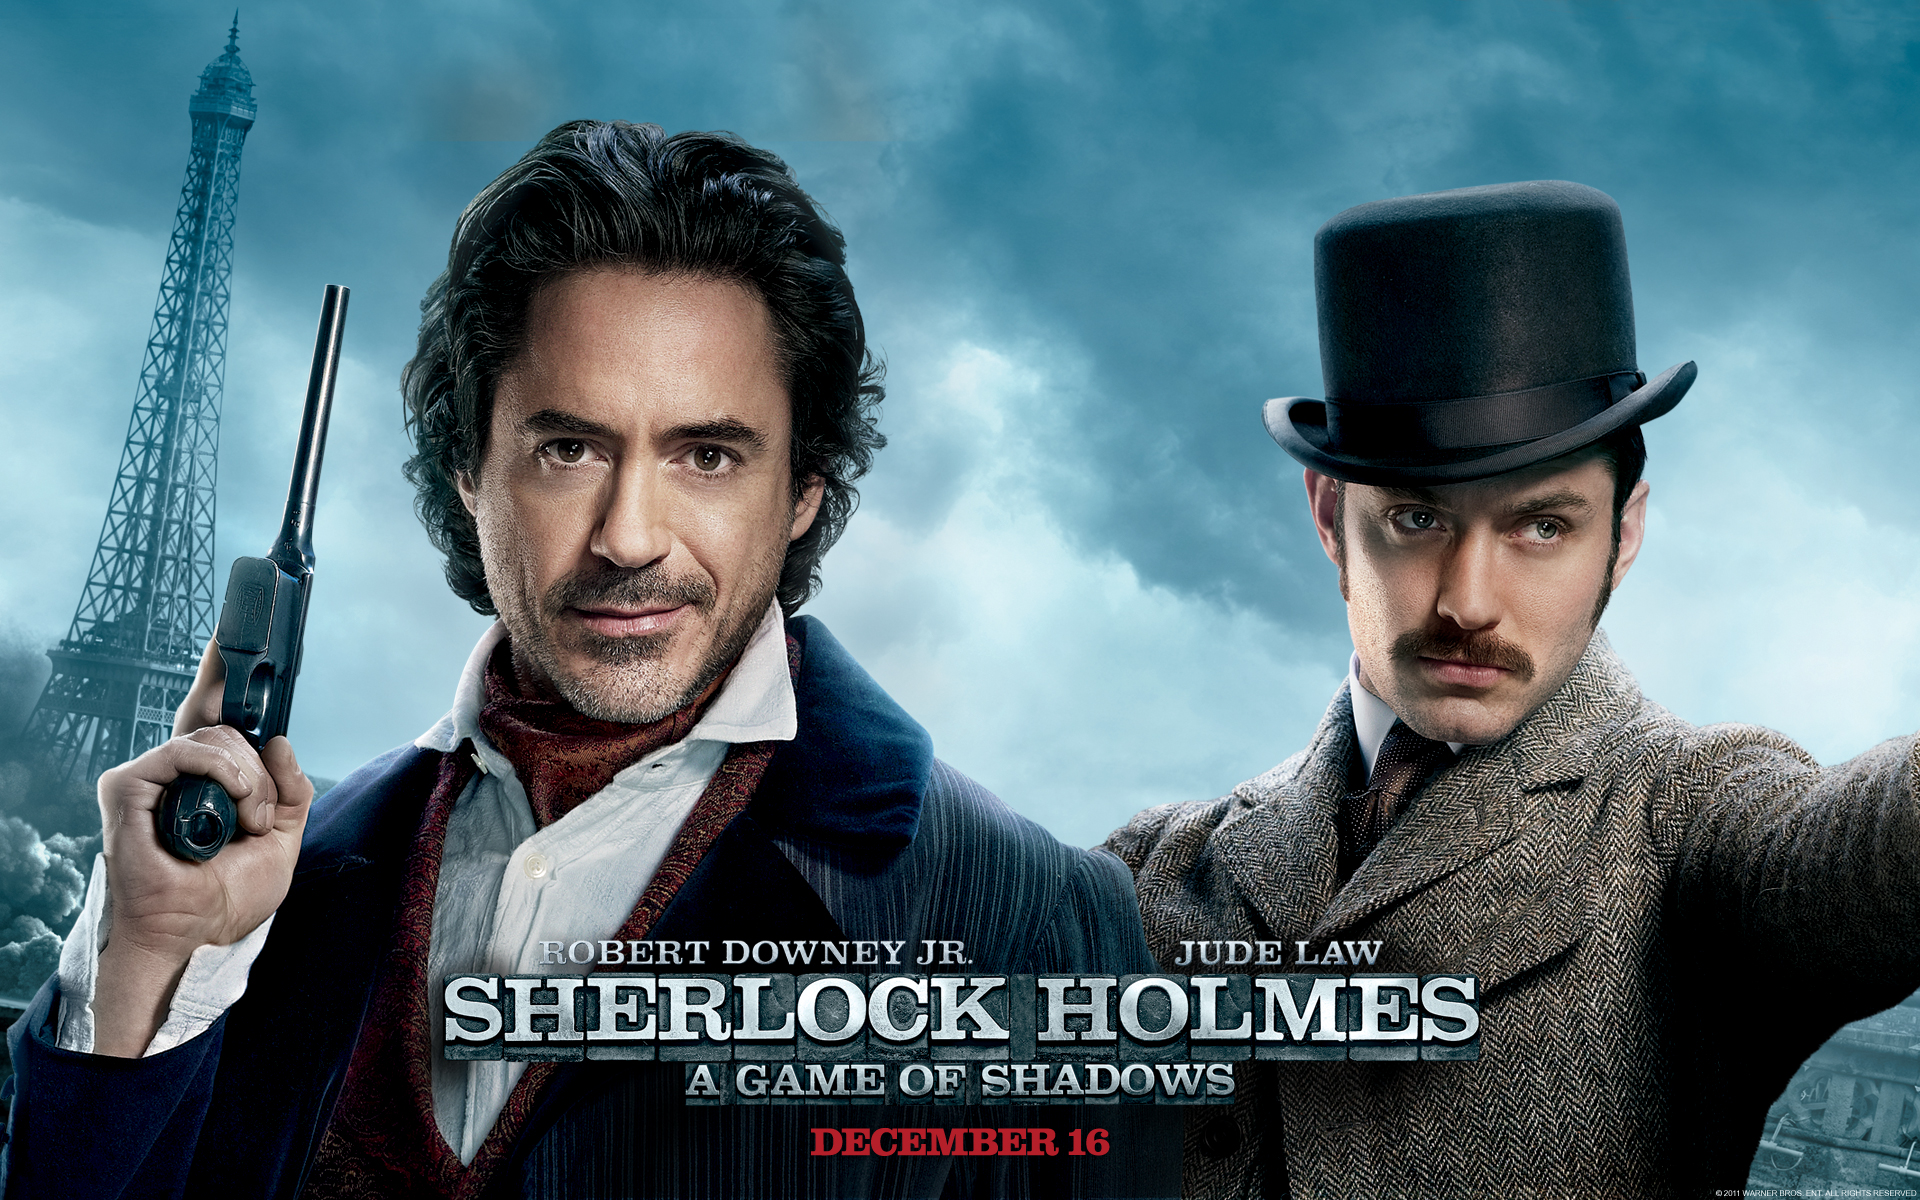 Sherlock Holmes: A Game Of Shadows Backgrounds, Compatible - PC, Mobile, Gadgets| 1920x1200 px